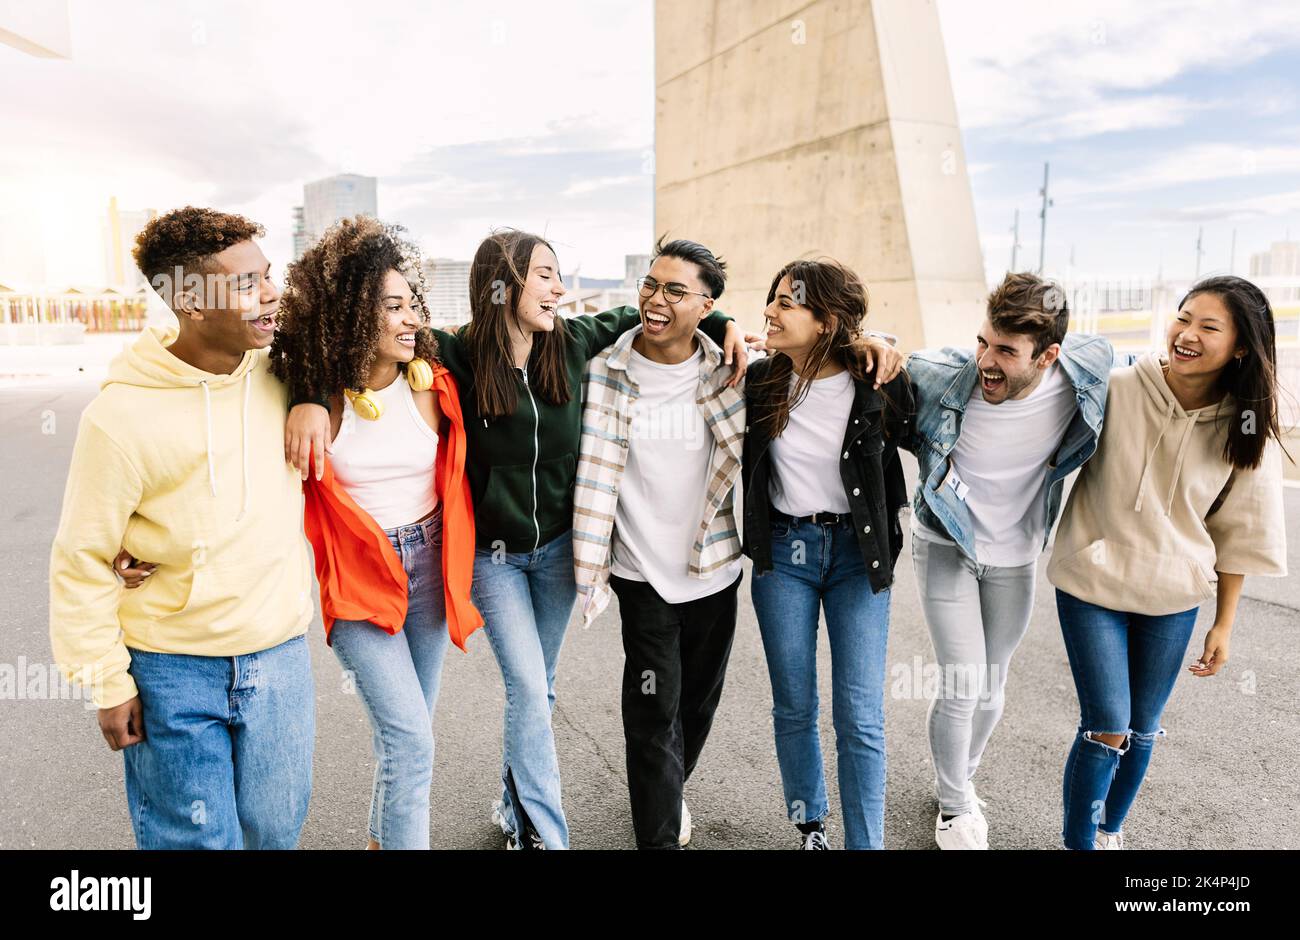 Multiracial group of young friends walking together outdoors Stock Photo